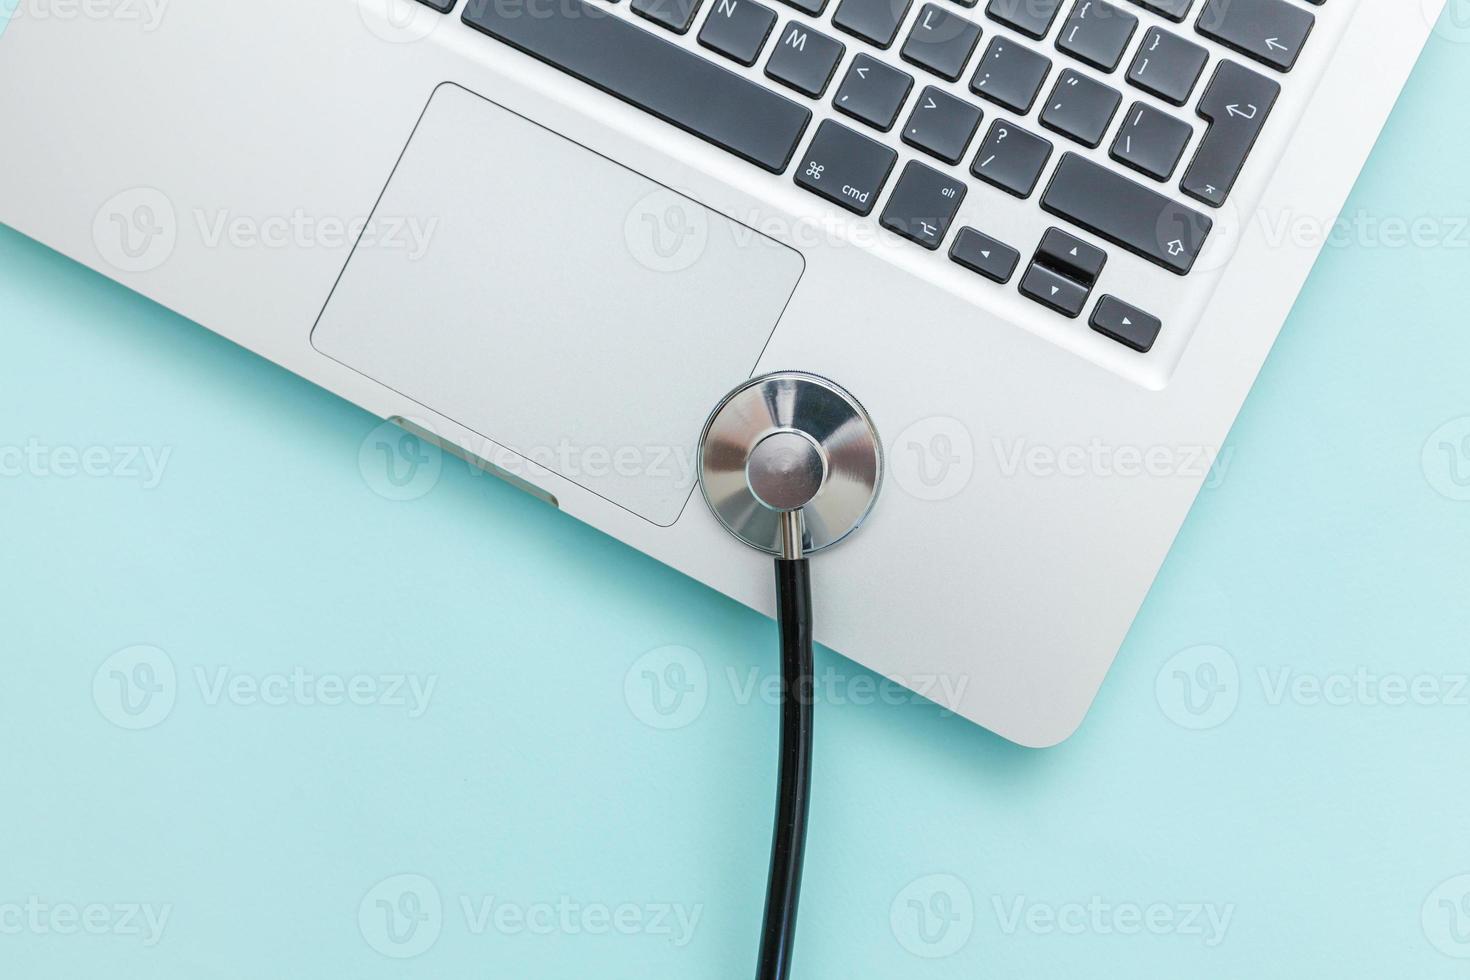 Stethoscope keyboard laptop computer isolated on blue background. Modern medical Information technology and sofware advances concept. Computer and gadget diagnostics and repair photo